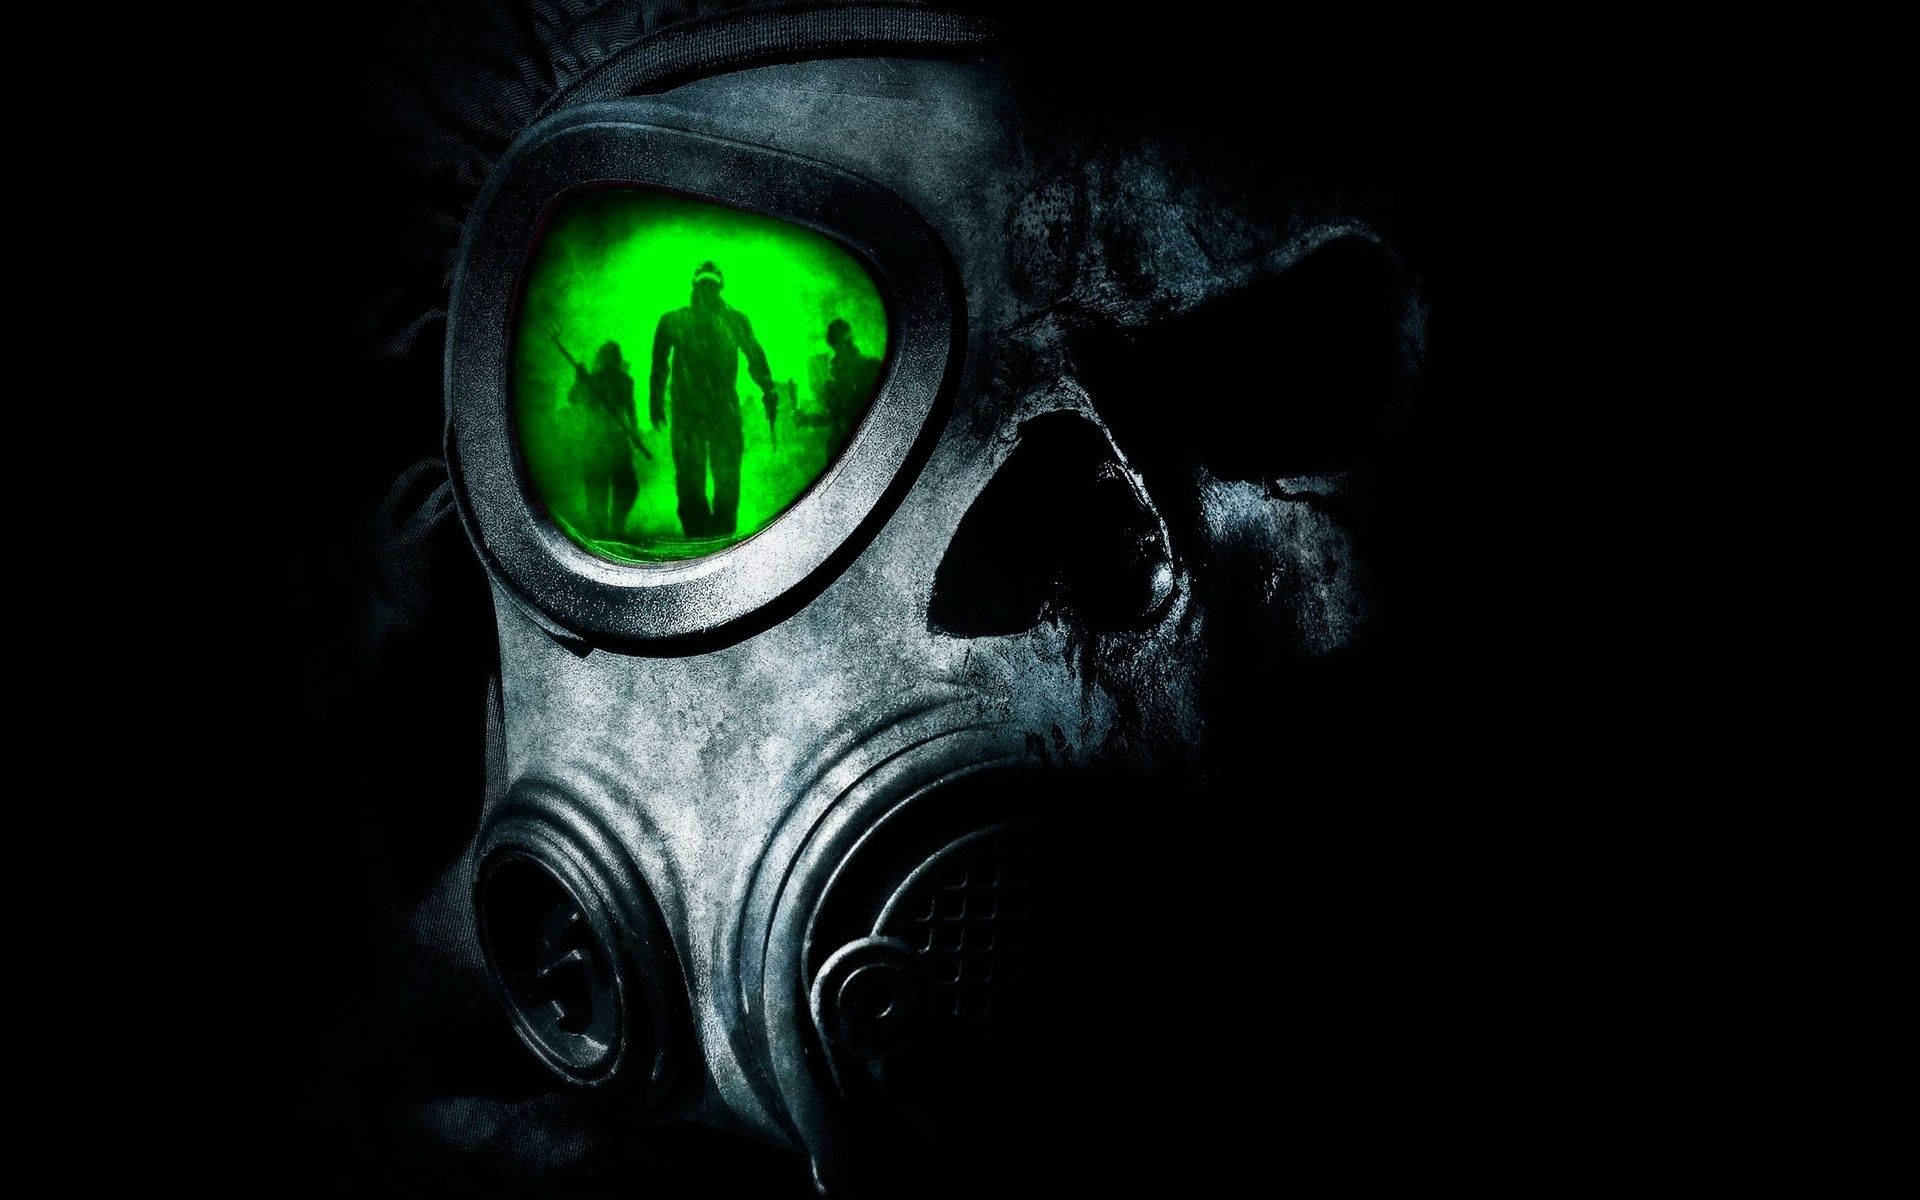 Mystery Gas Mask Graphic Art Wallpaper